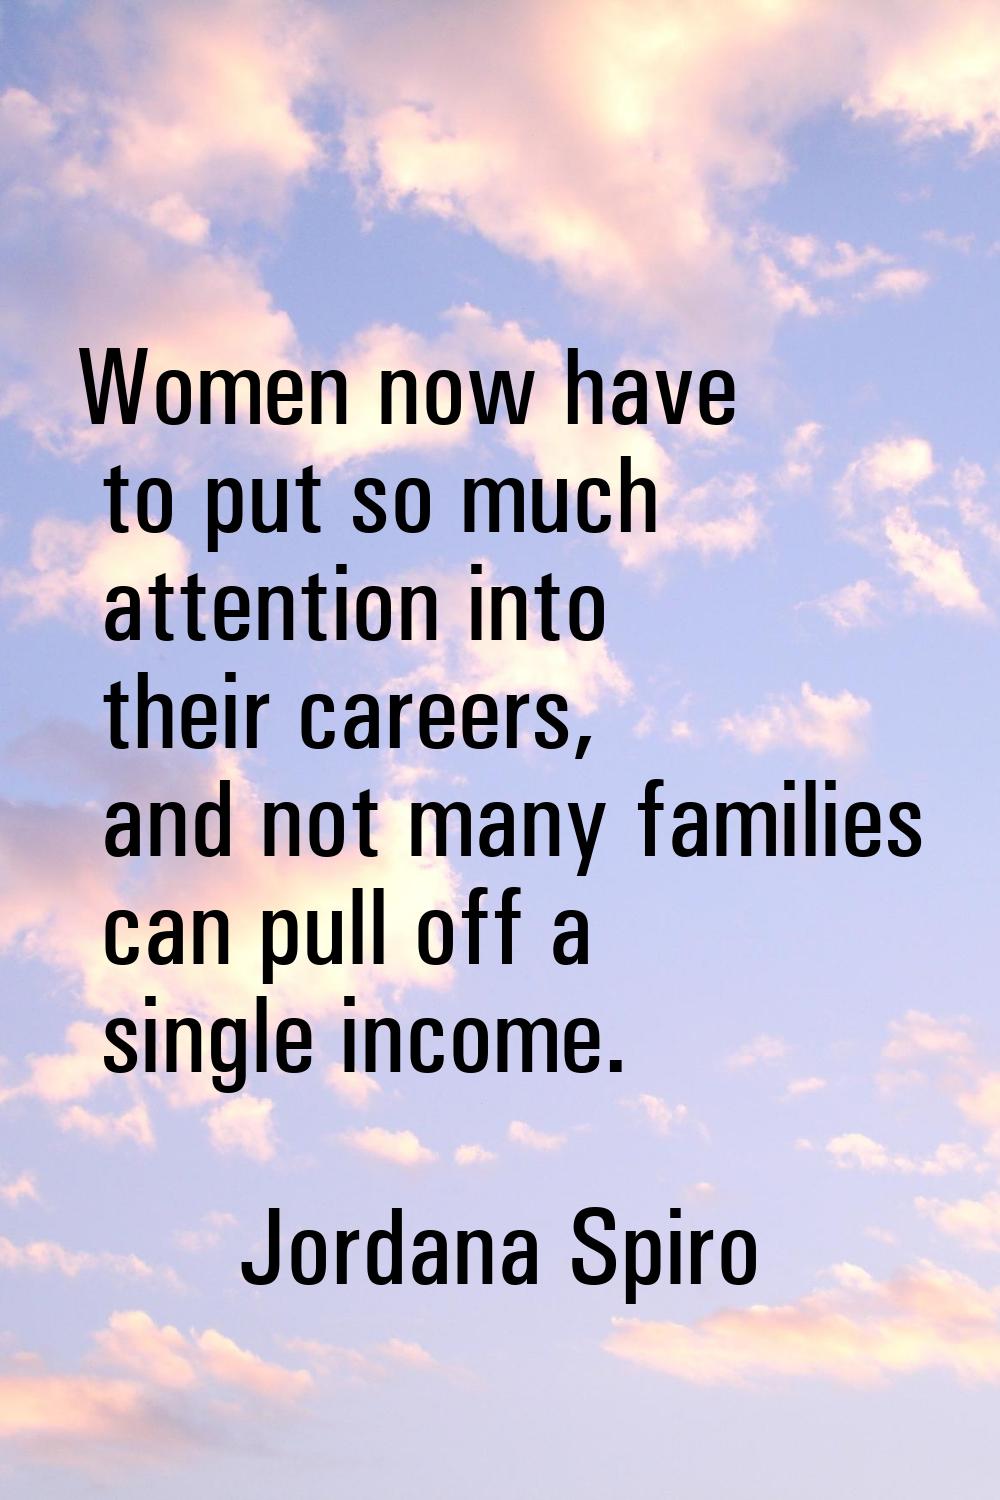 Women now have to put so much attention into their careers, and not many families can pull off a si